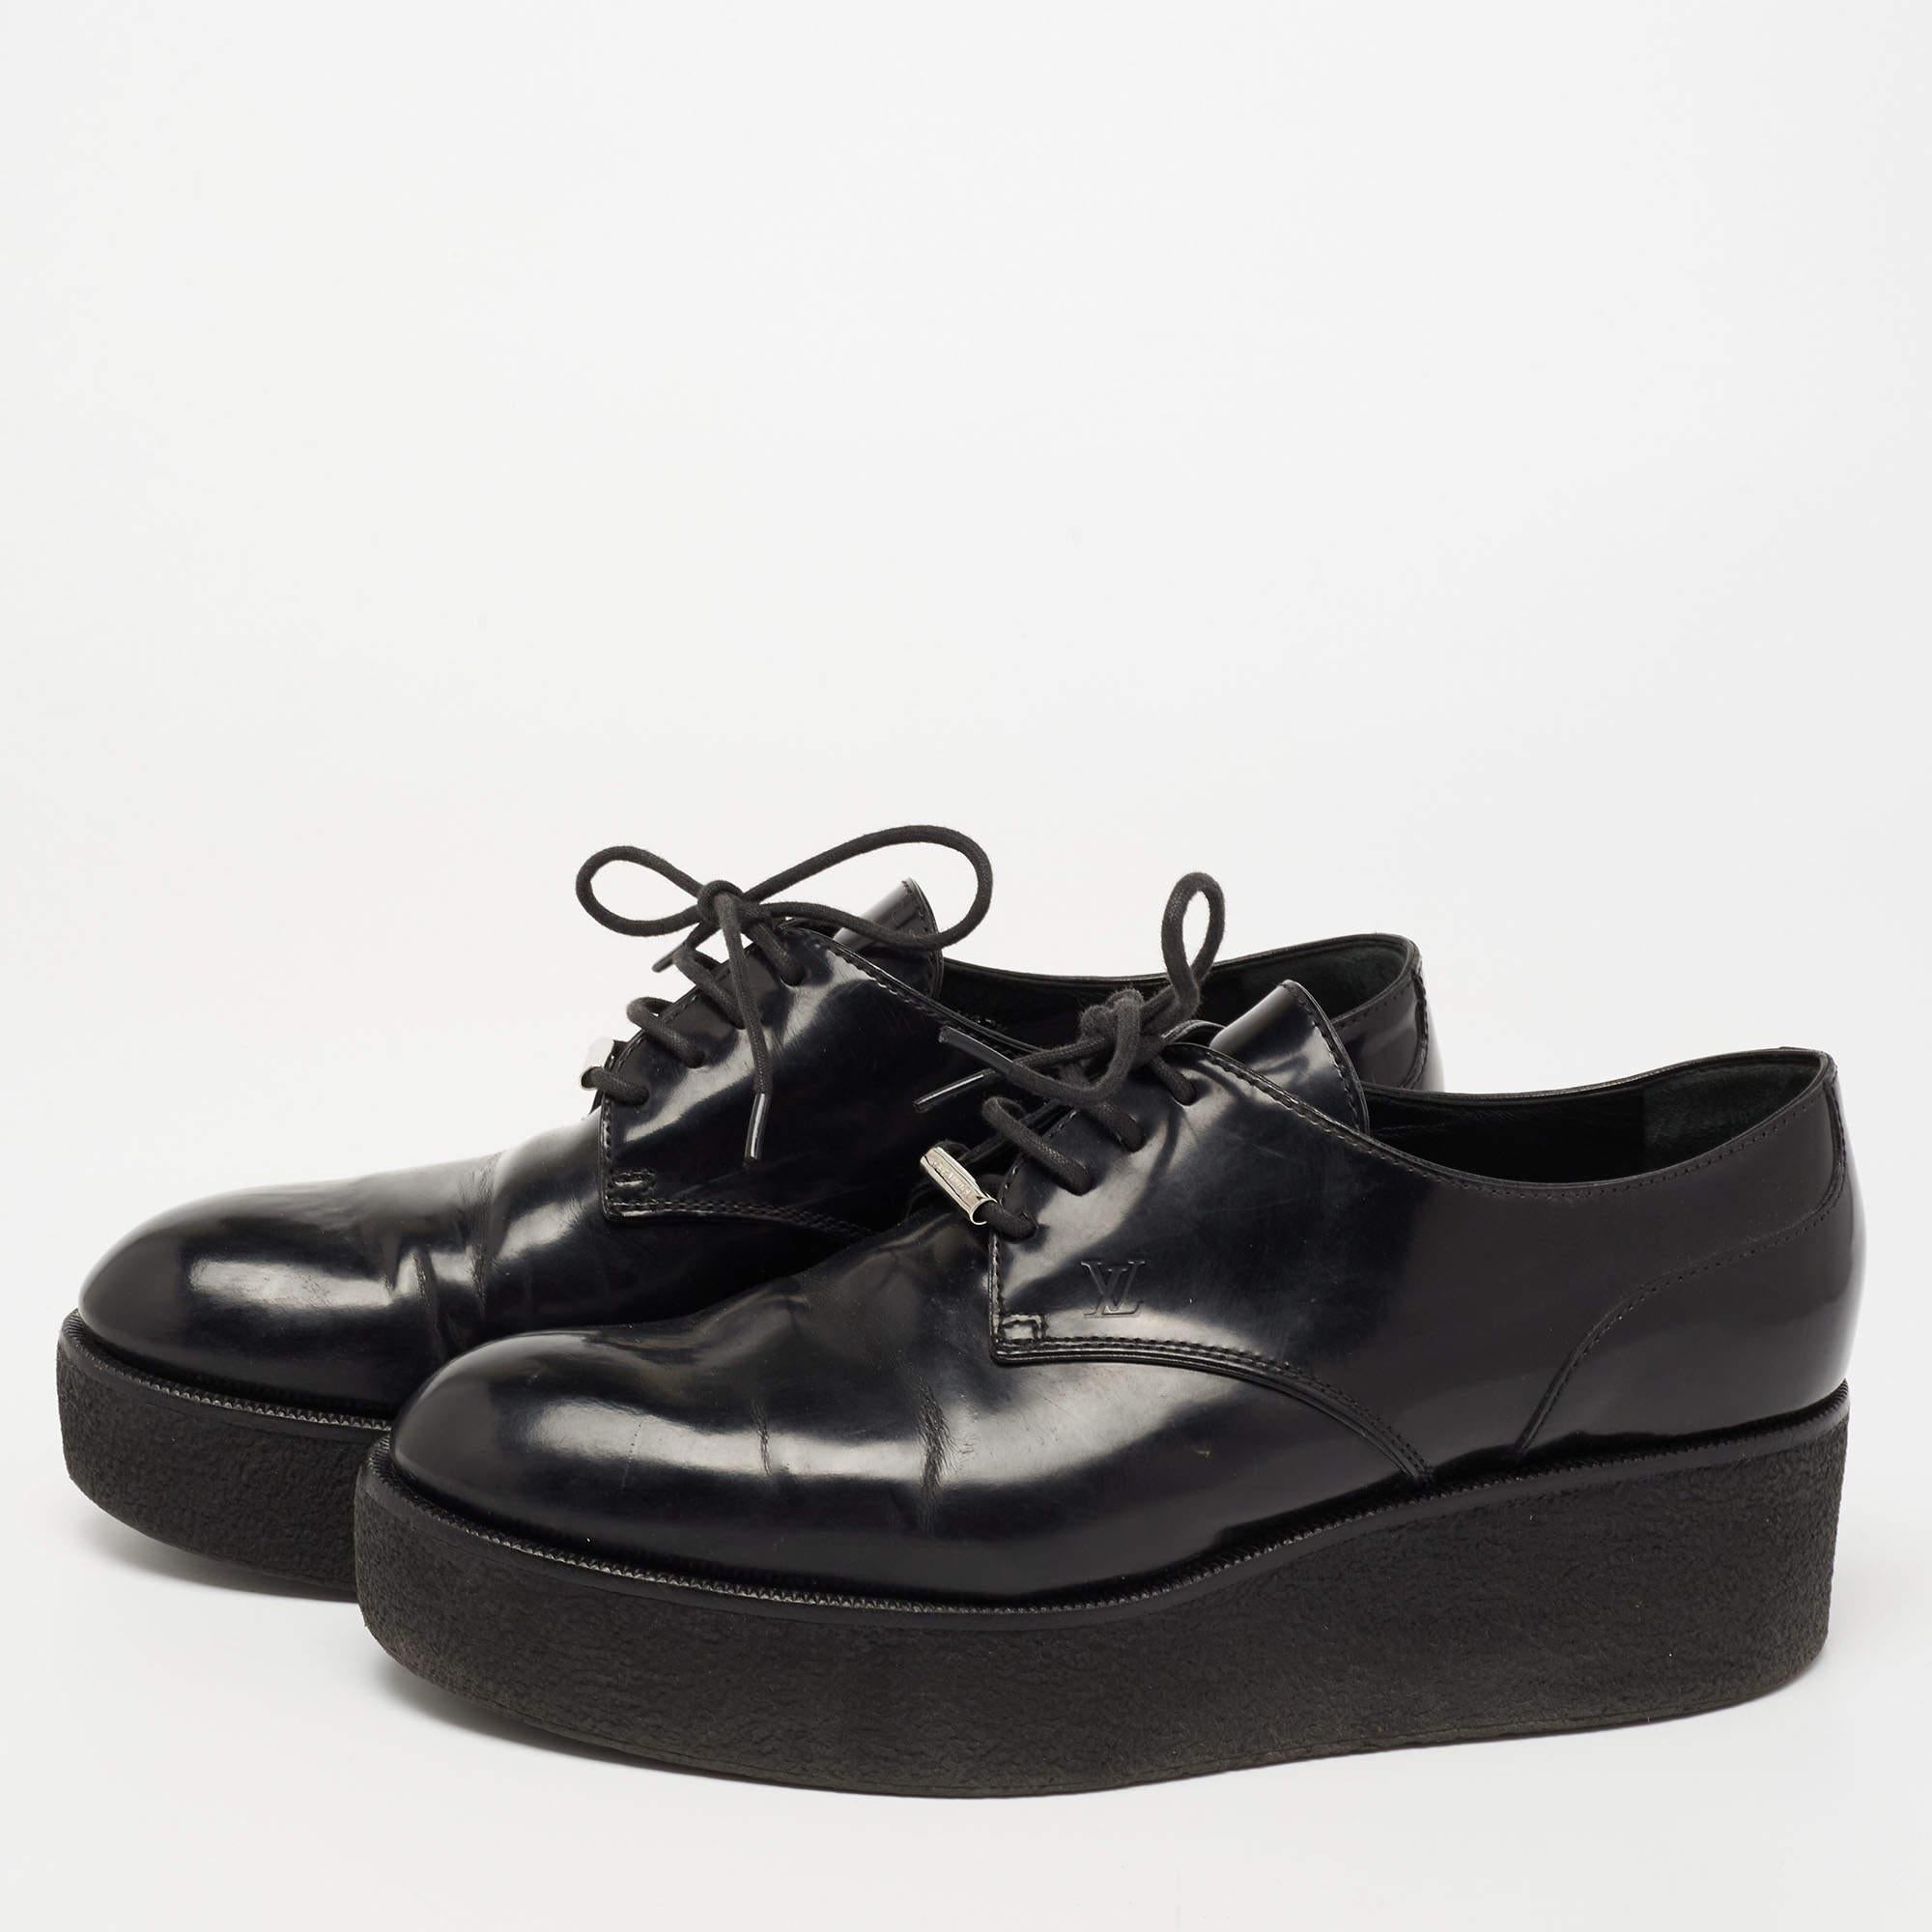 Louis Vuitton's timeless aesthetic and stellar craftsmanship in shoemaking is evident in these oxfords. Crafted from leather, the uppers are equipped with lace ties and the shoes are finished with platforms and durable rubber soles.

